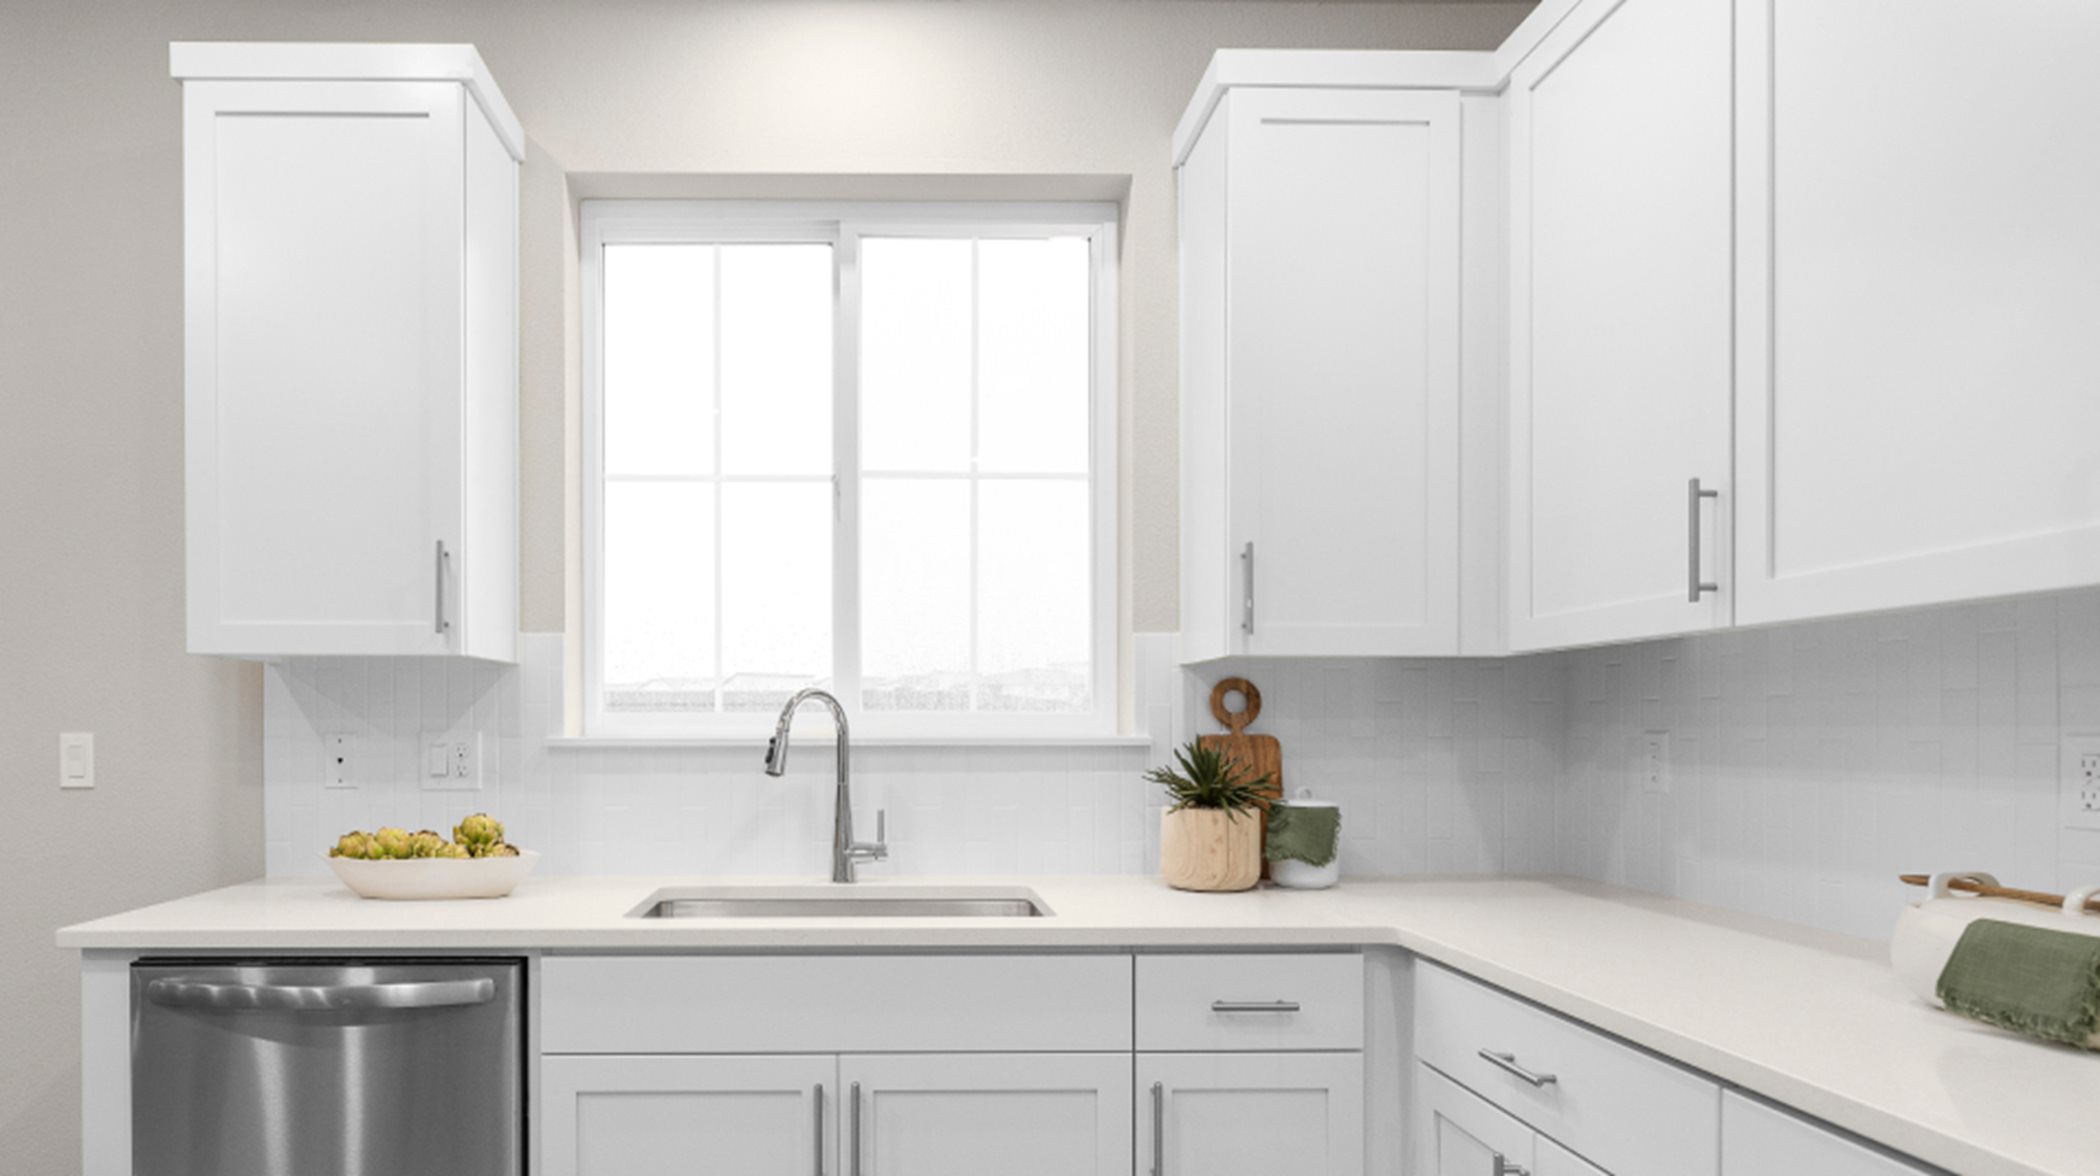 cabinetry and kitchen sink